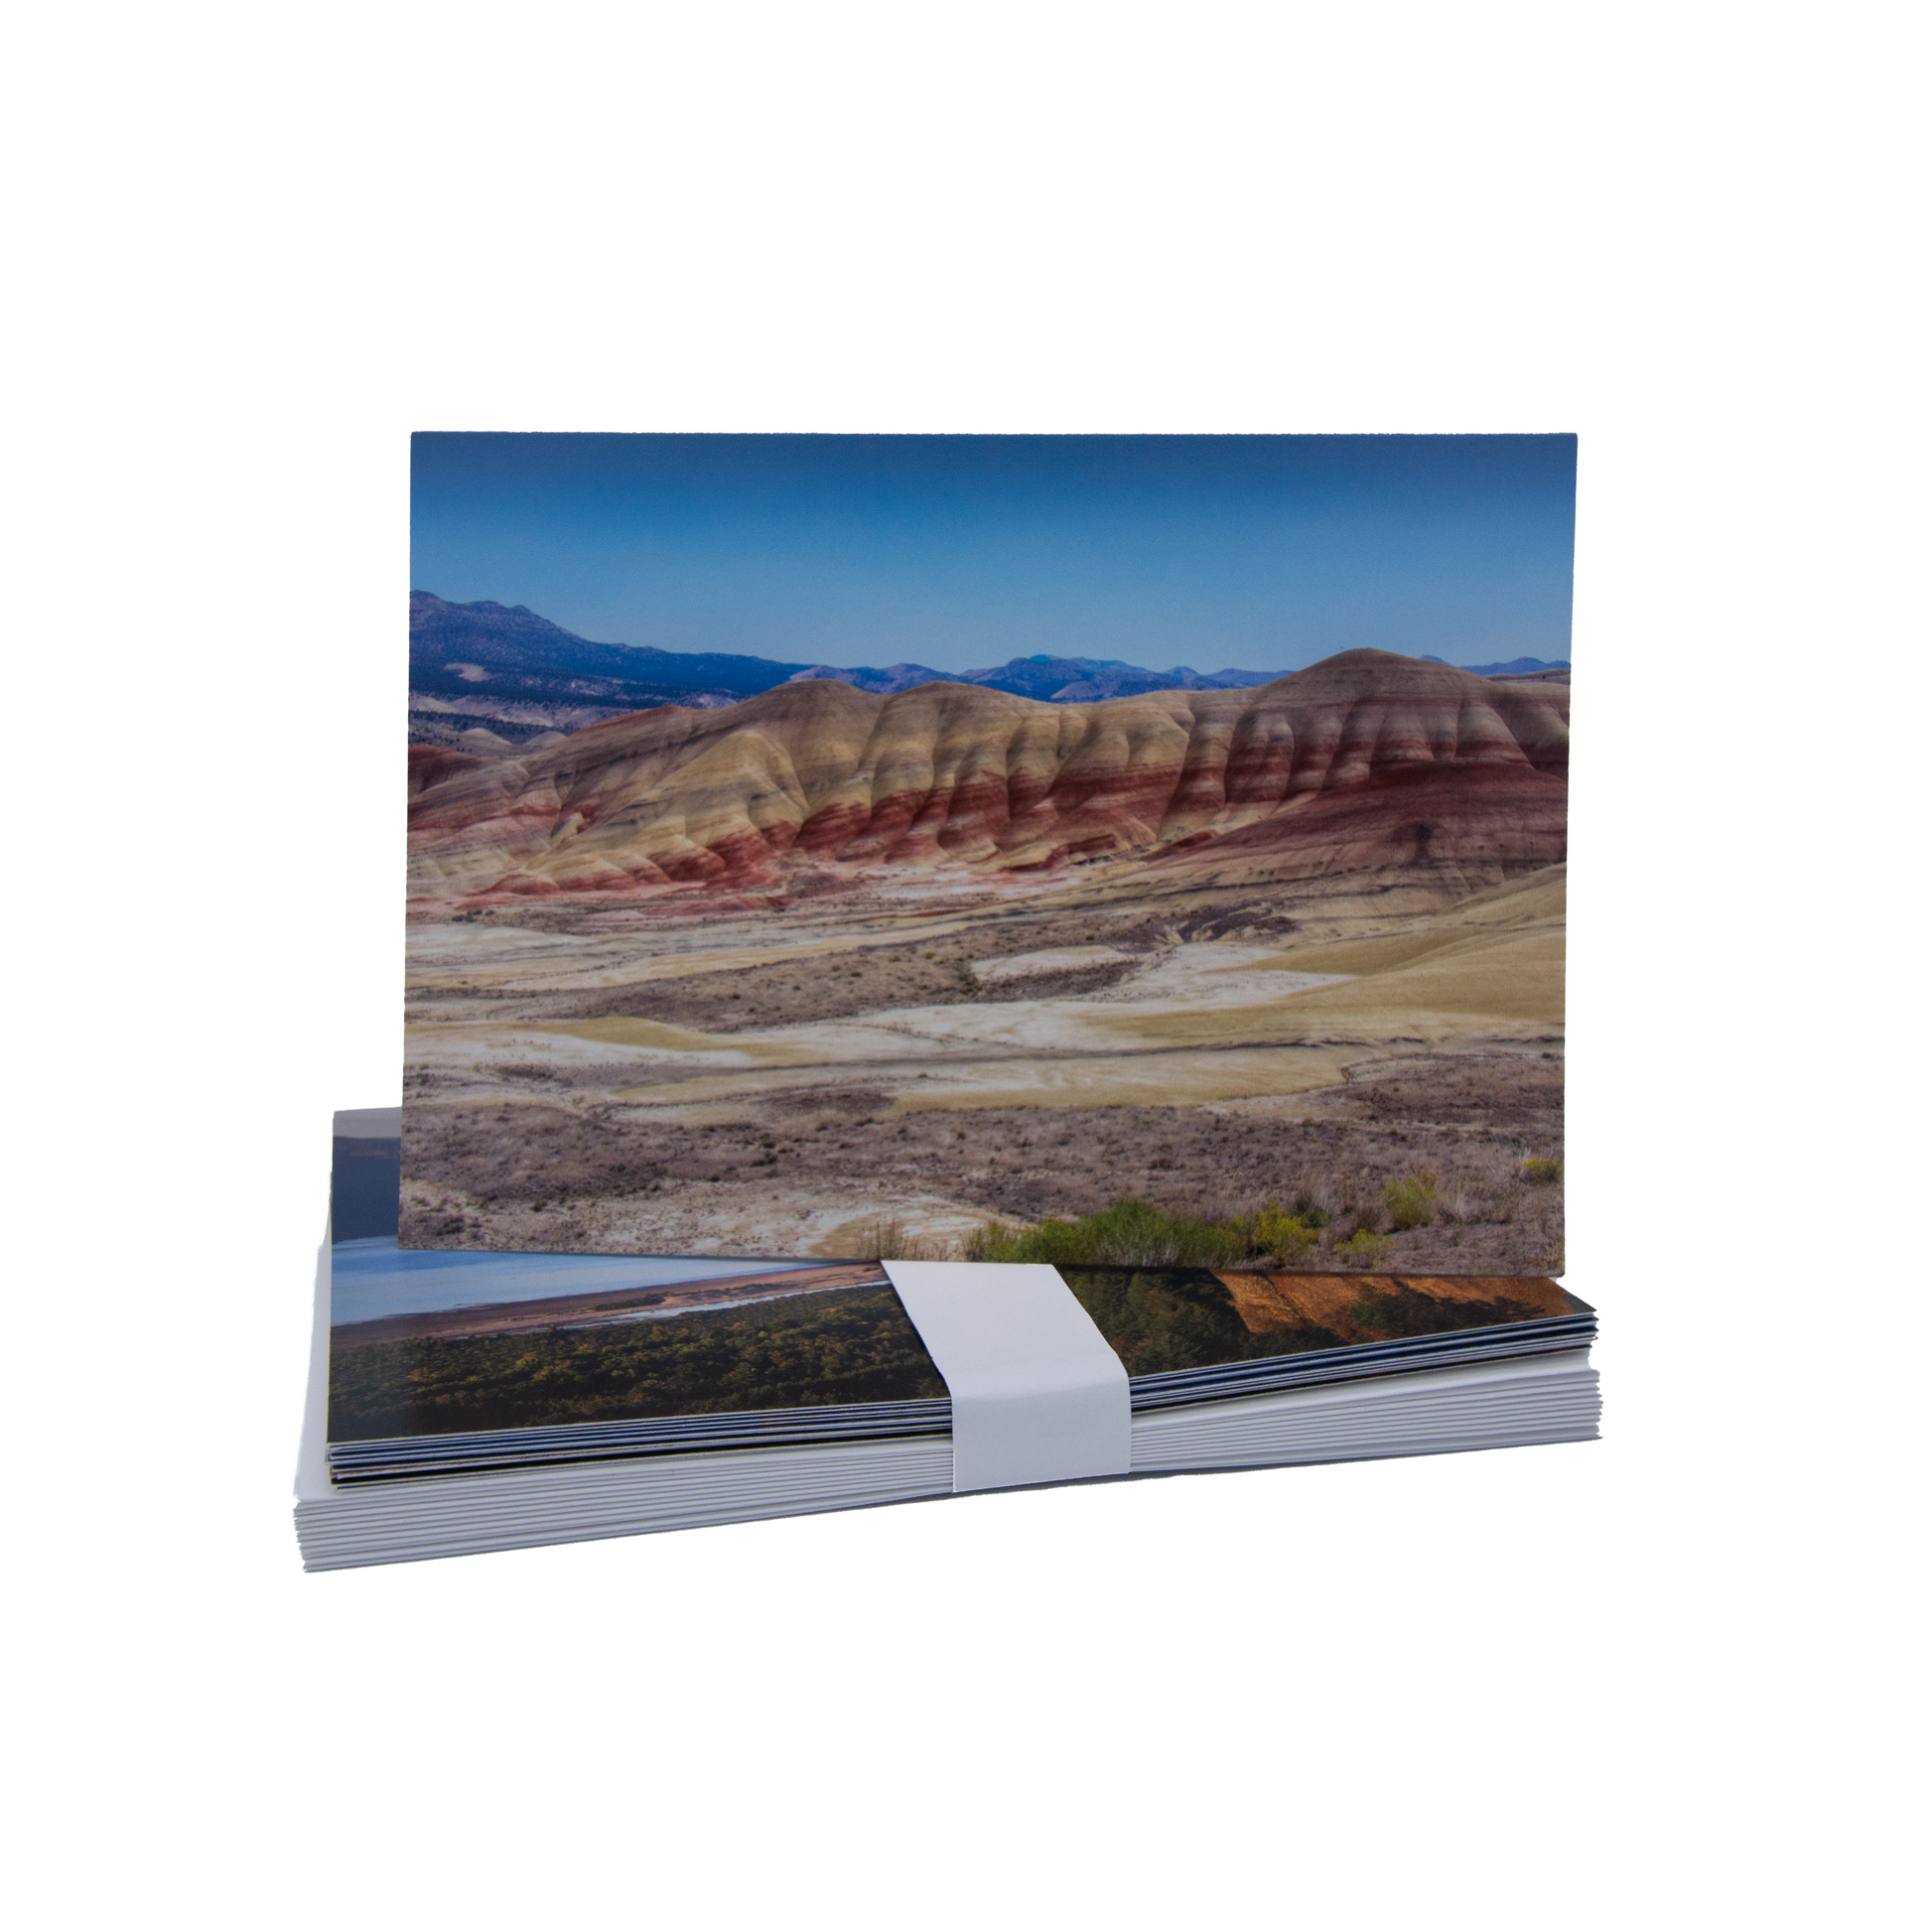 This pack of 12 blank greeting cards comes with a quantity of three each of four iconic Oregon landscapes